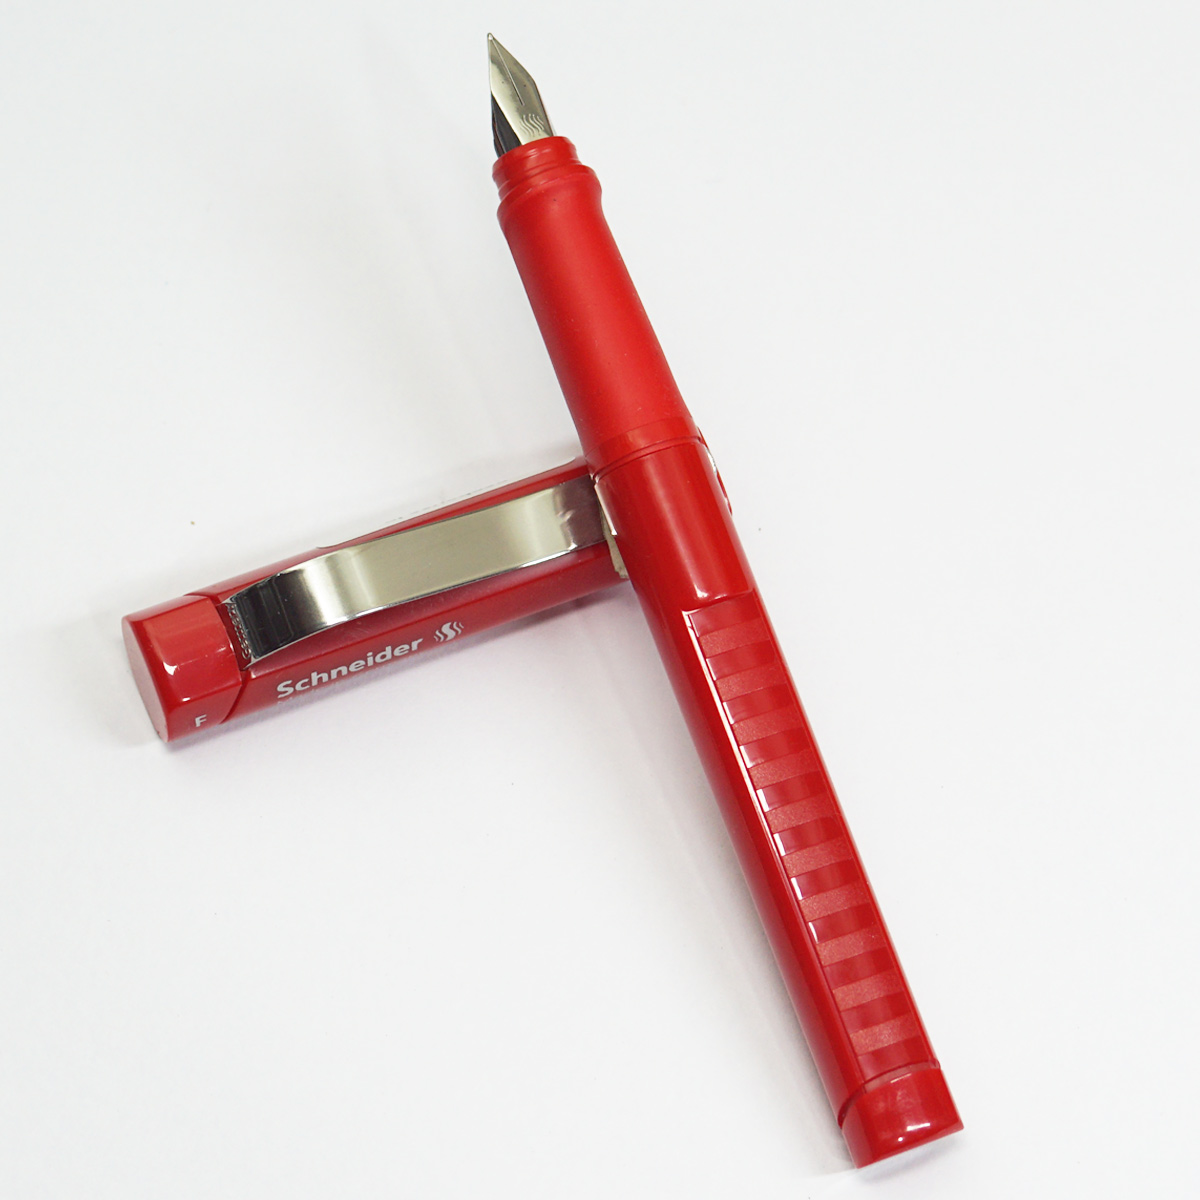 Schneider 160287 Base Red Color Body With Broad Silver Clip Fine Nib Cartridge Type Fountain Pen SKU 23309